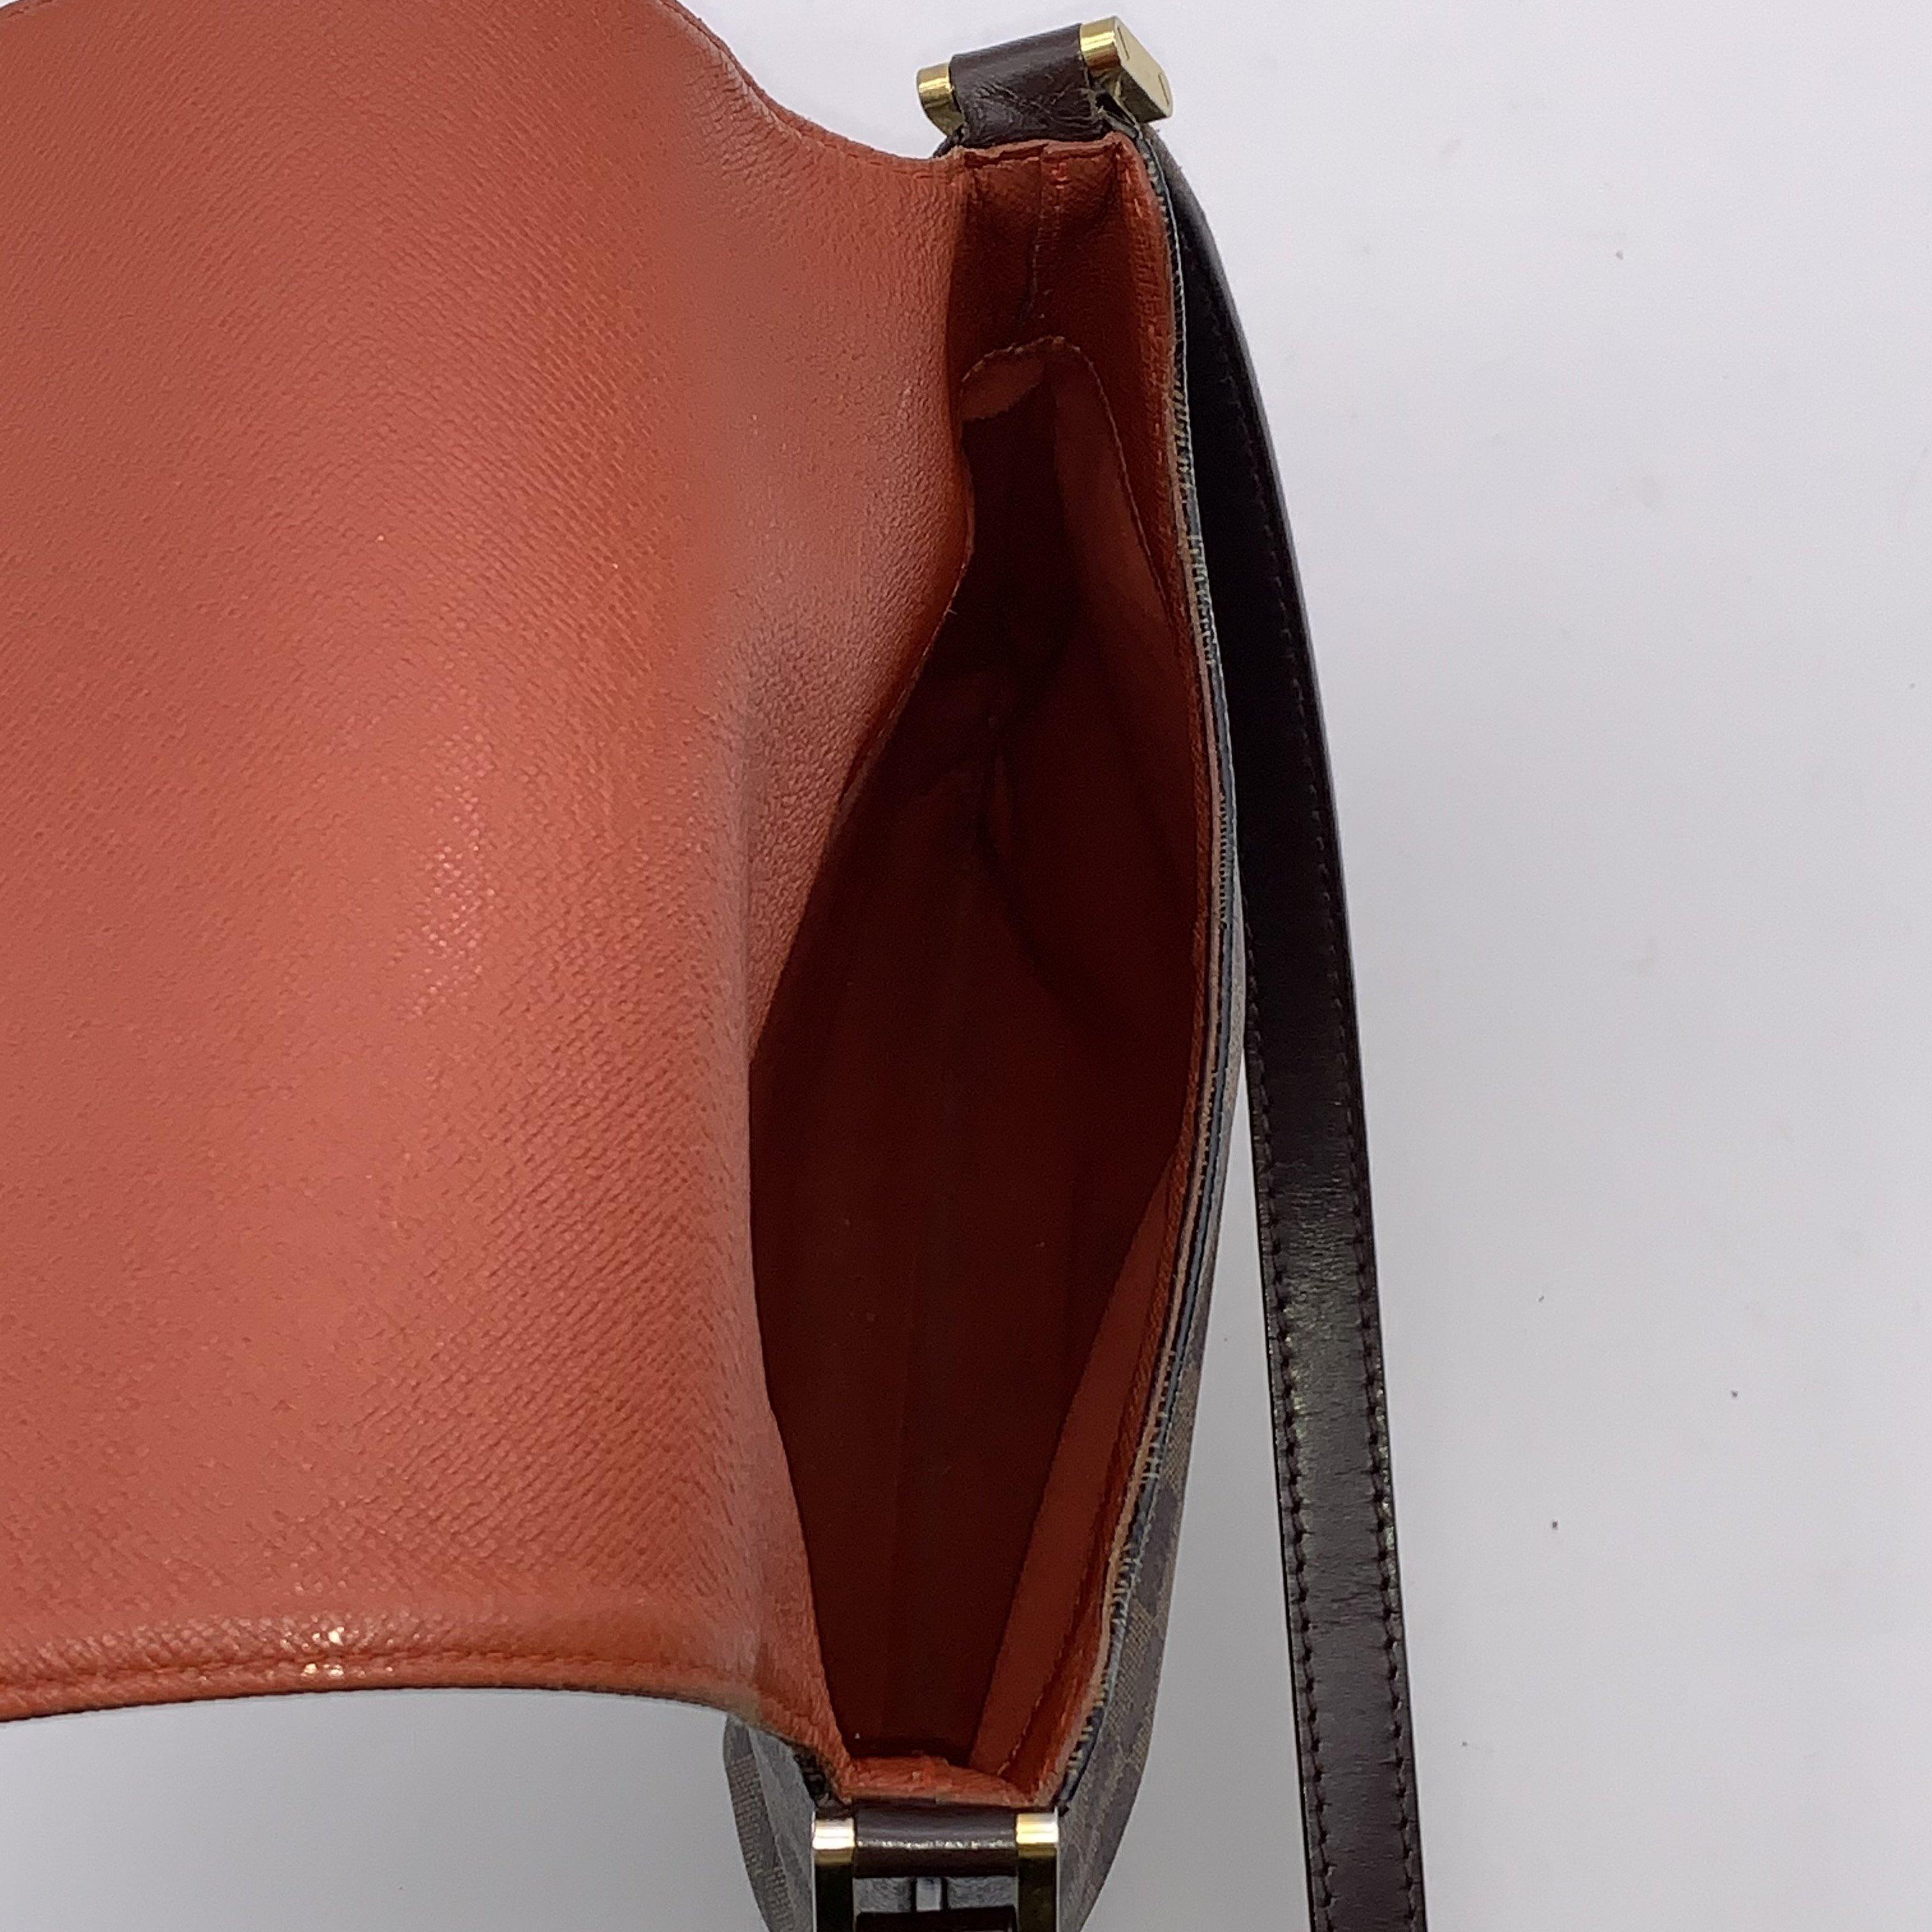 Women's LOUIS VUITTON Musette Shoulder bag in Brown Leather